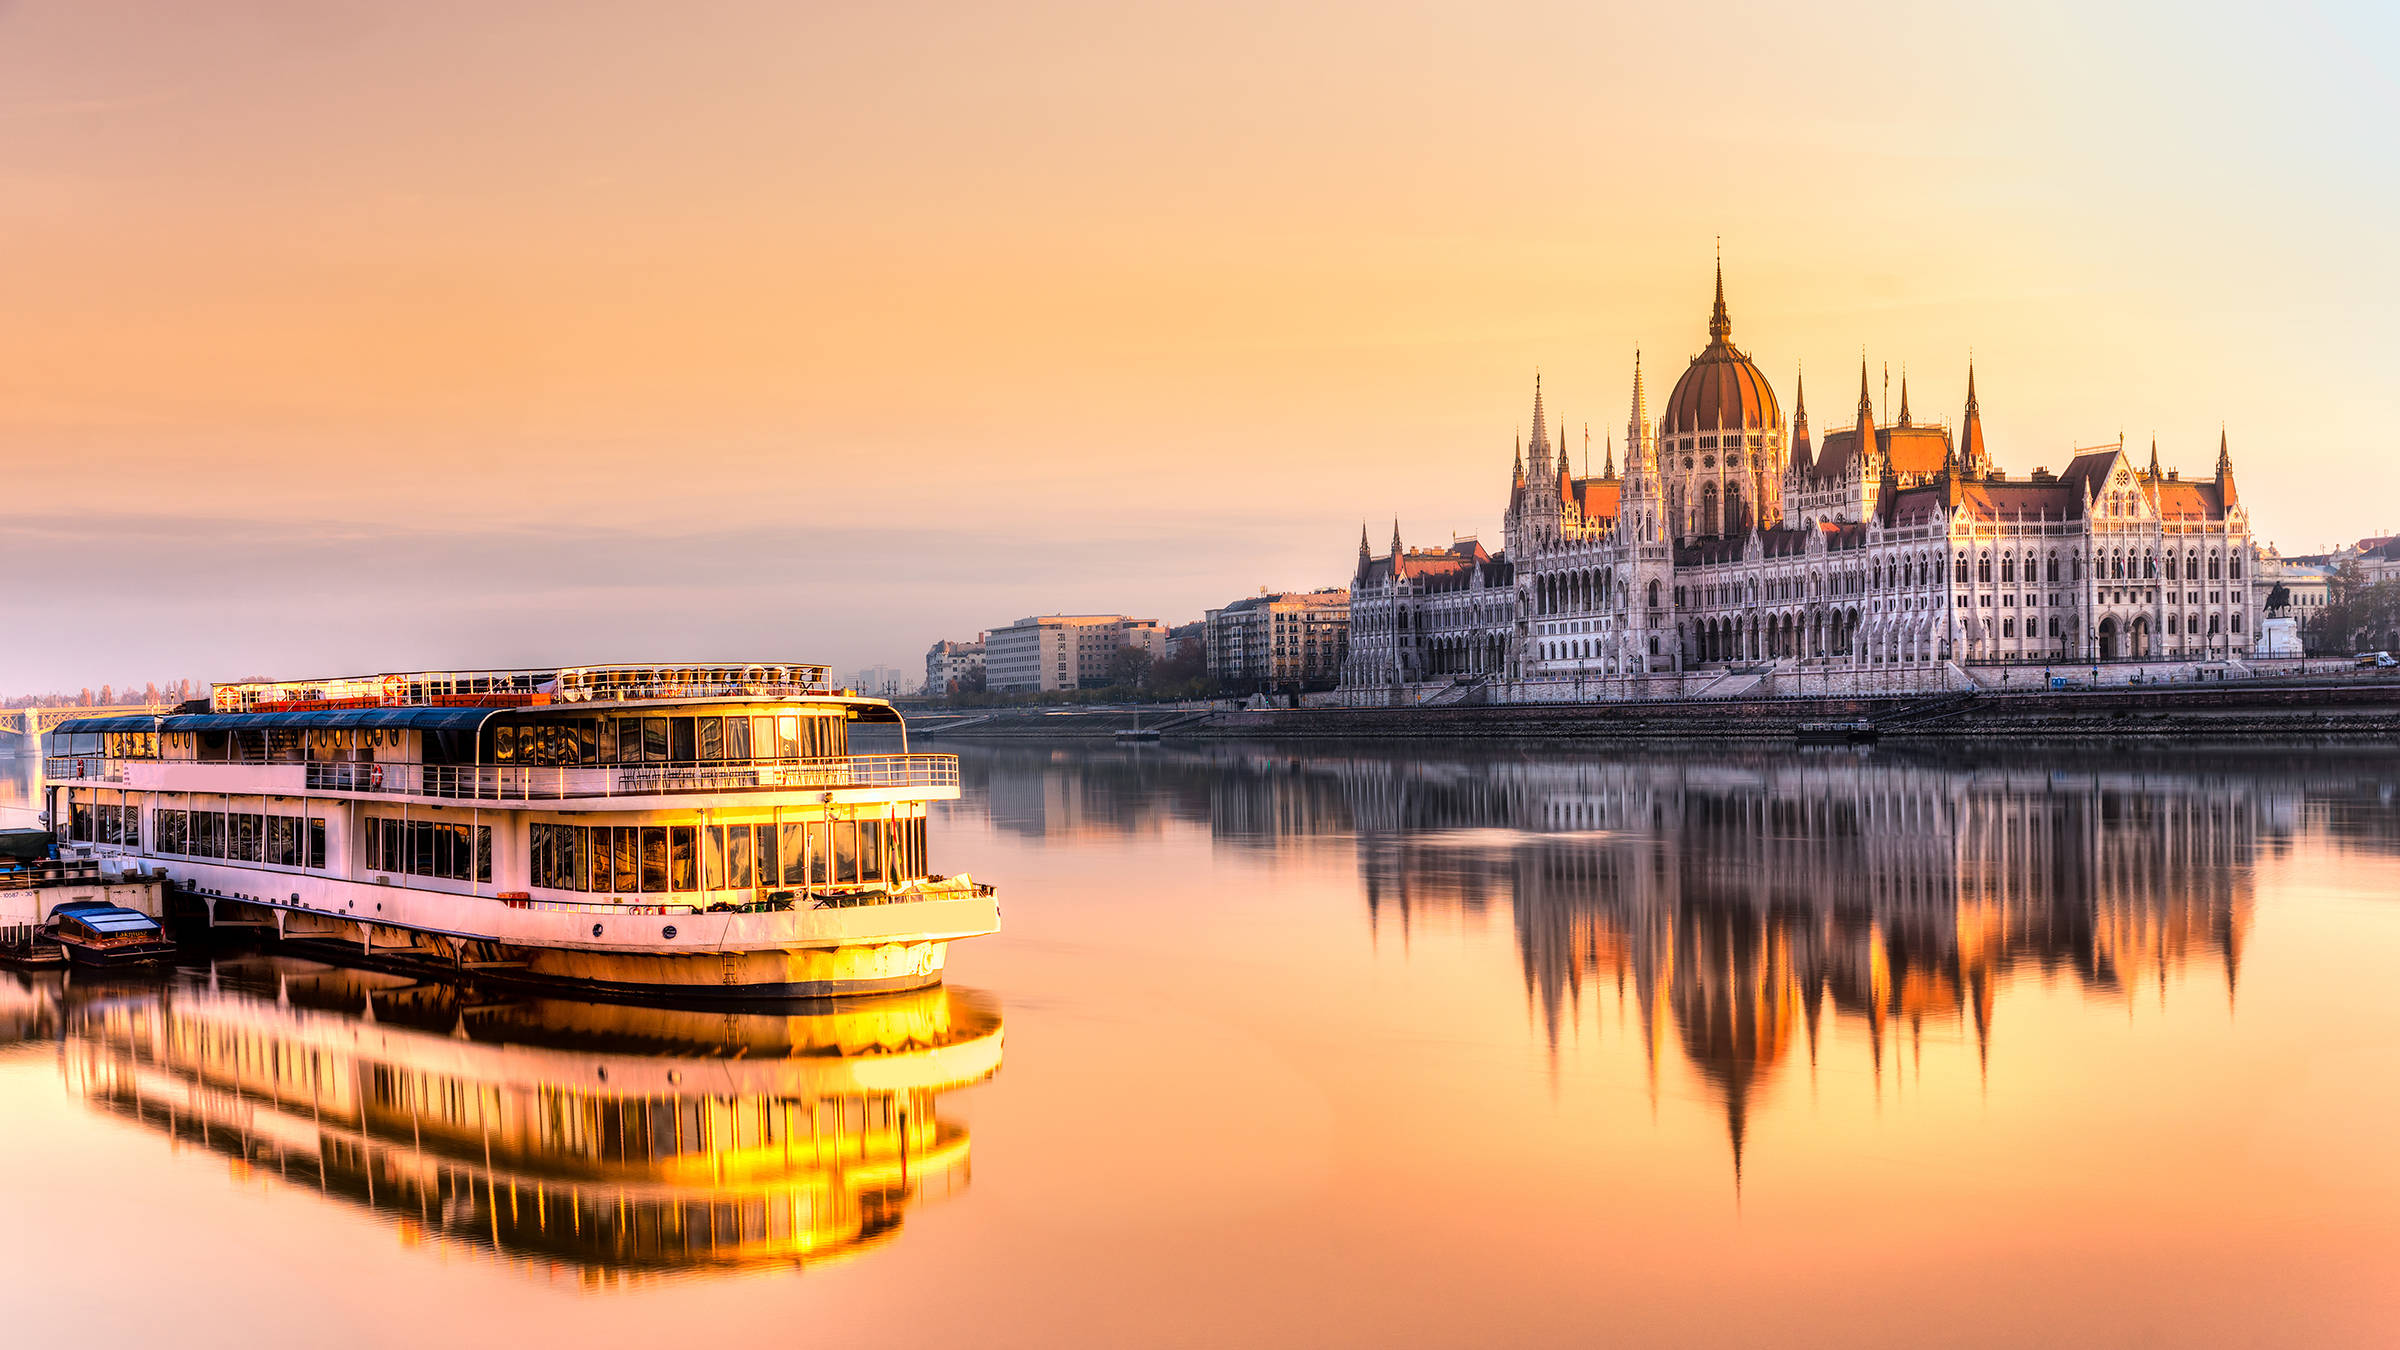 Boat trip on the Danube - H2 Hotel Budapest - Official website